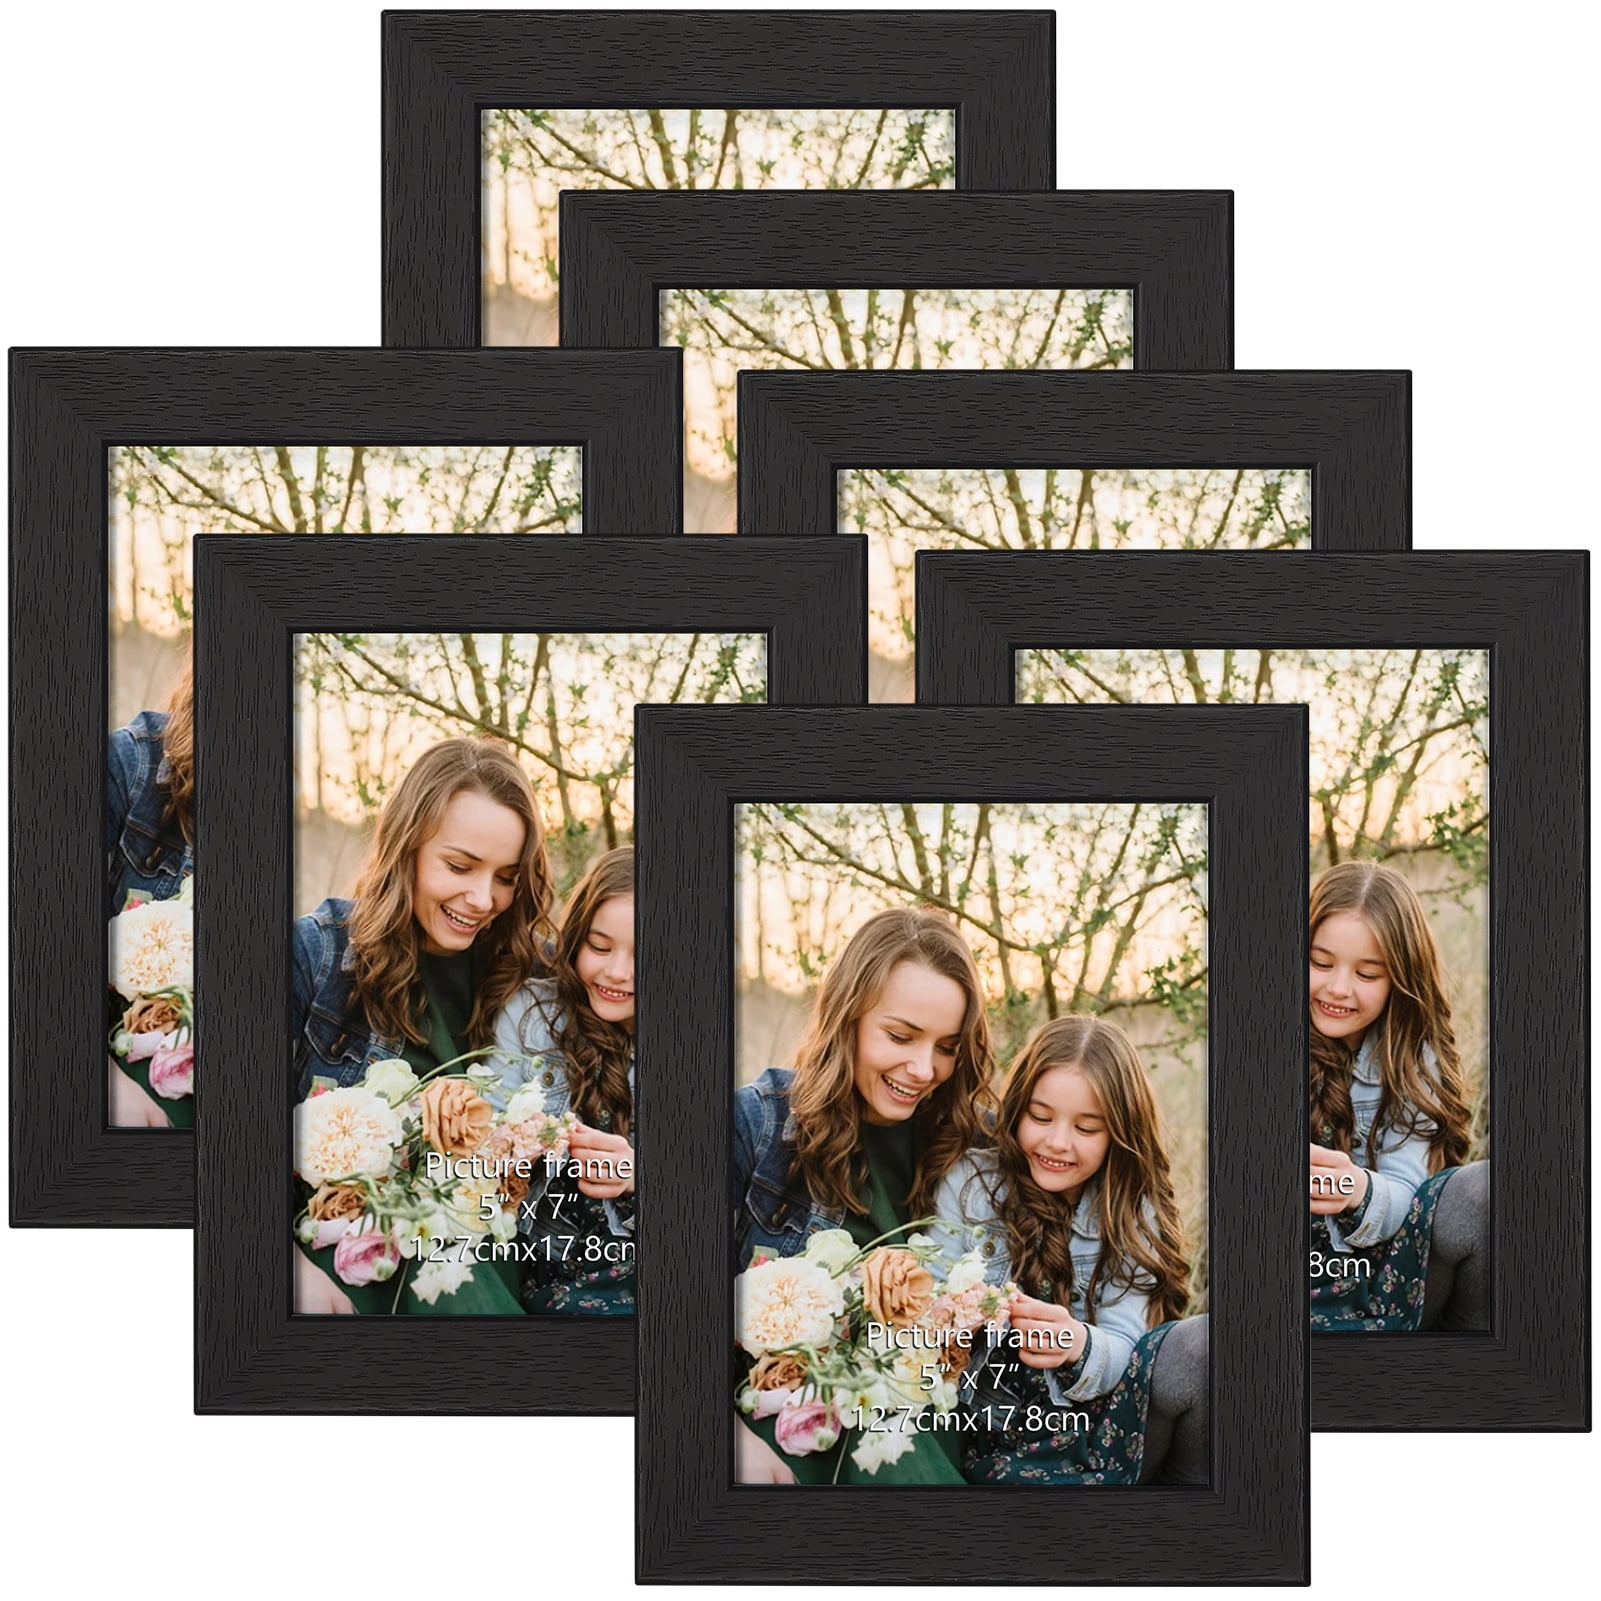 Spepla 5x7 Metal Picture Frames for Tabletop or Wall Mounting Display, 2  Pack 7 x 5 Photo Frame